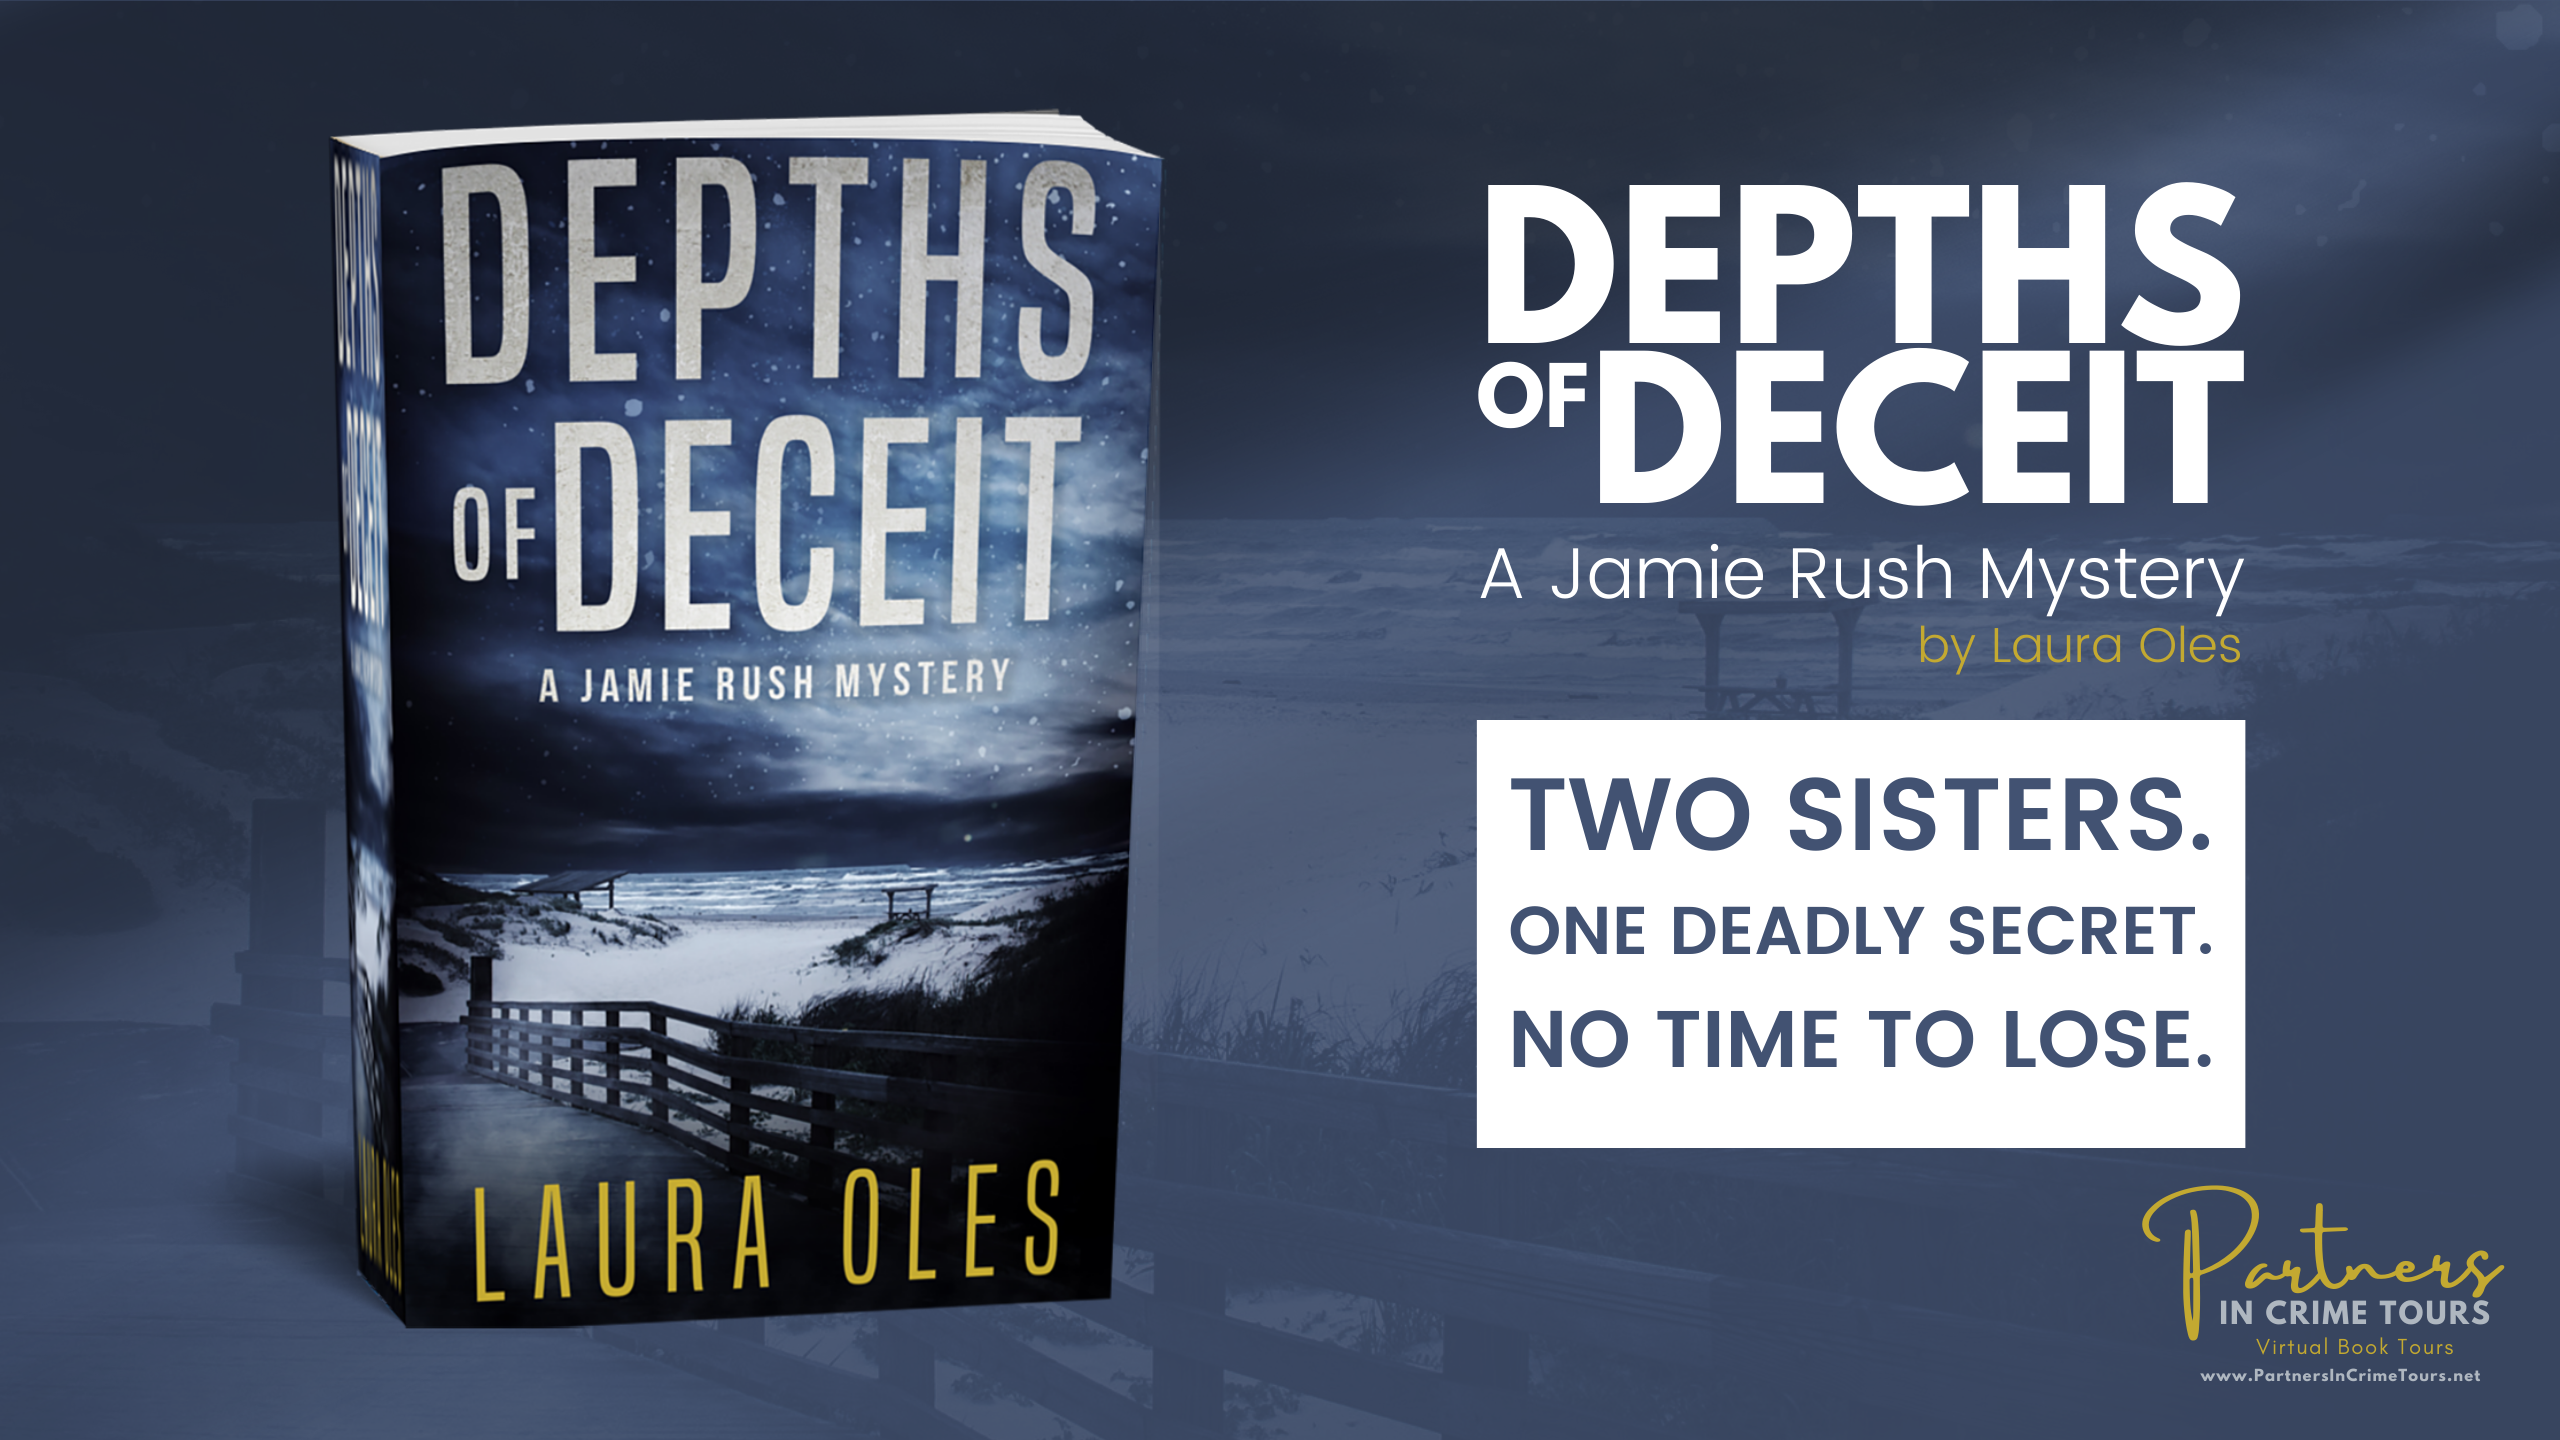 You are currently viewing Depths of Deceit: By Laura Oles